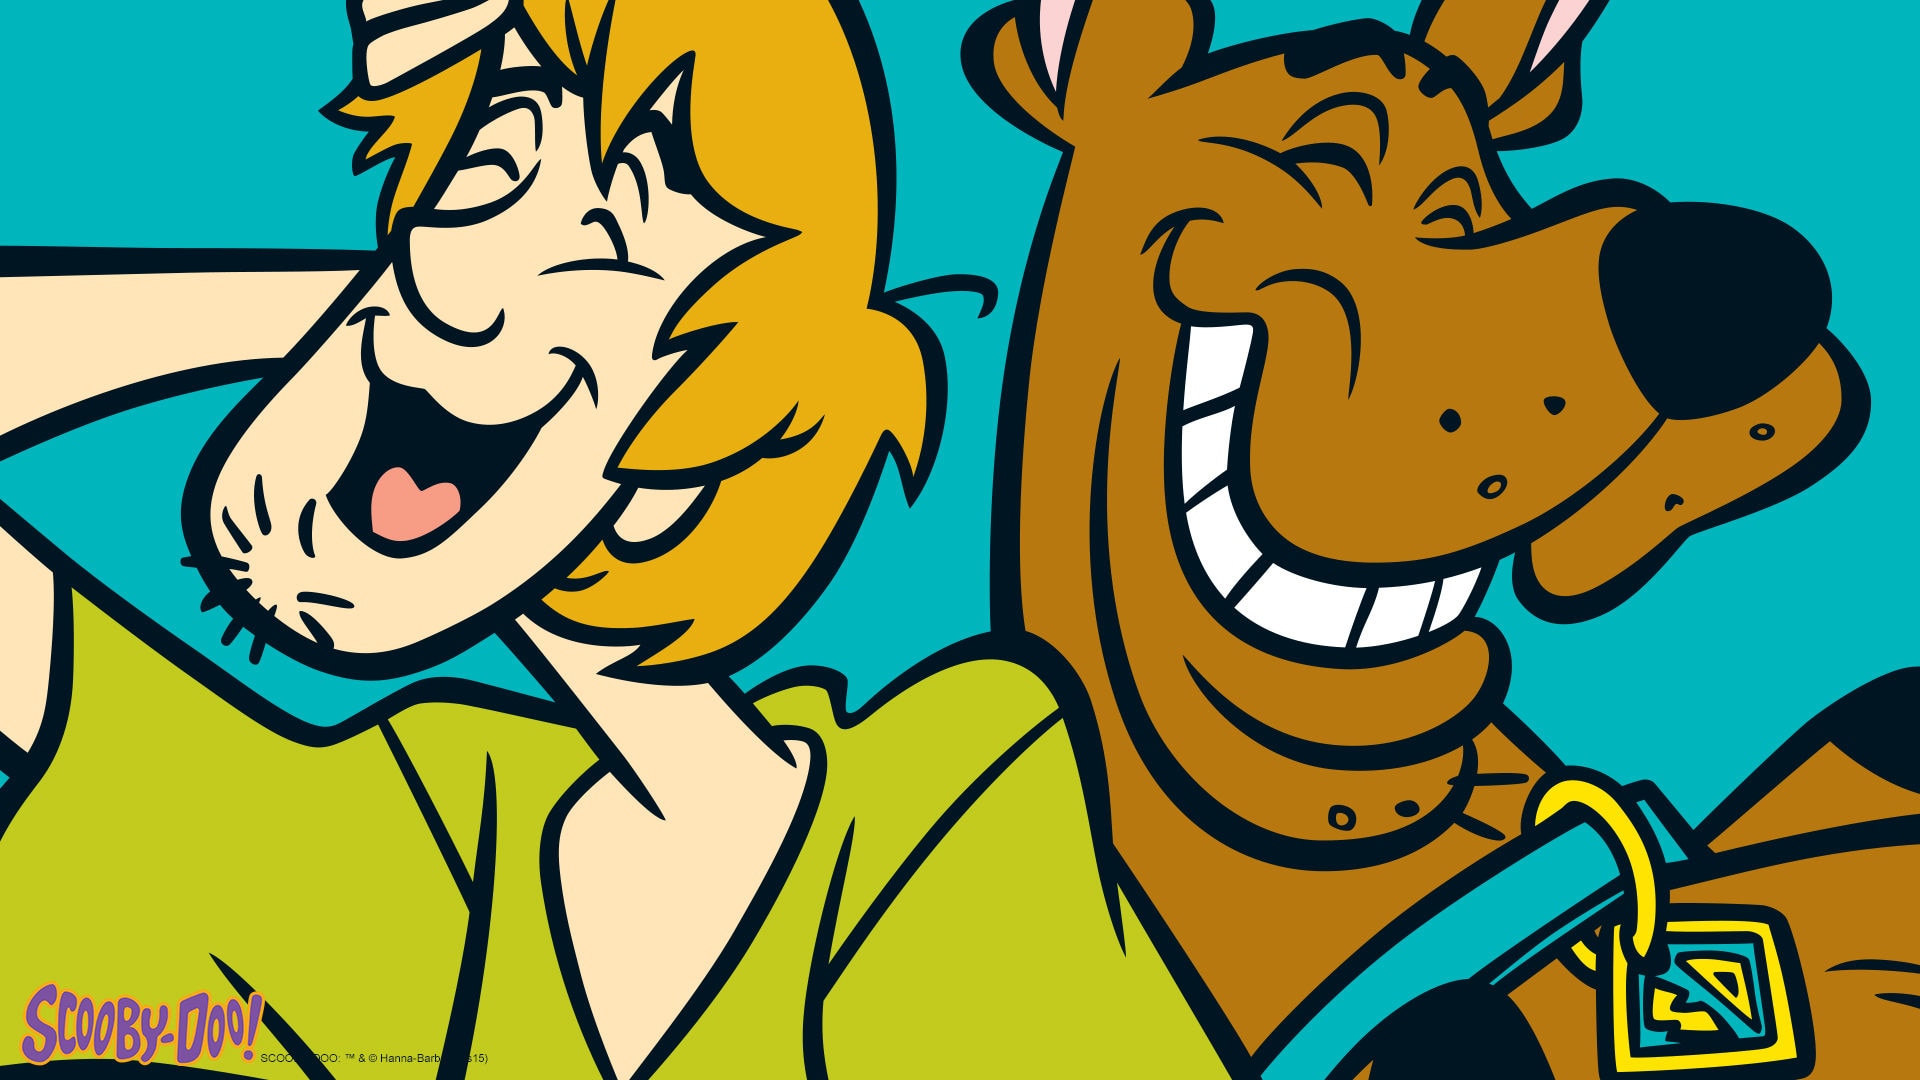 Shaggy and Scooby Doo share a laugh